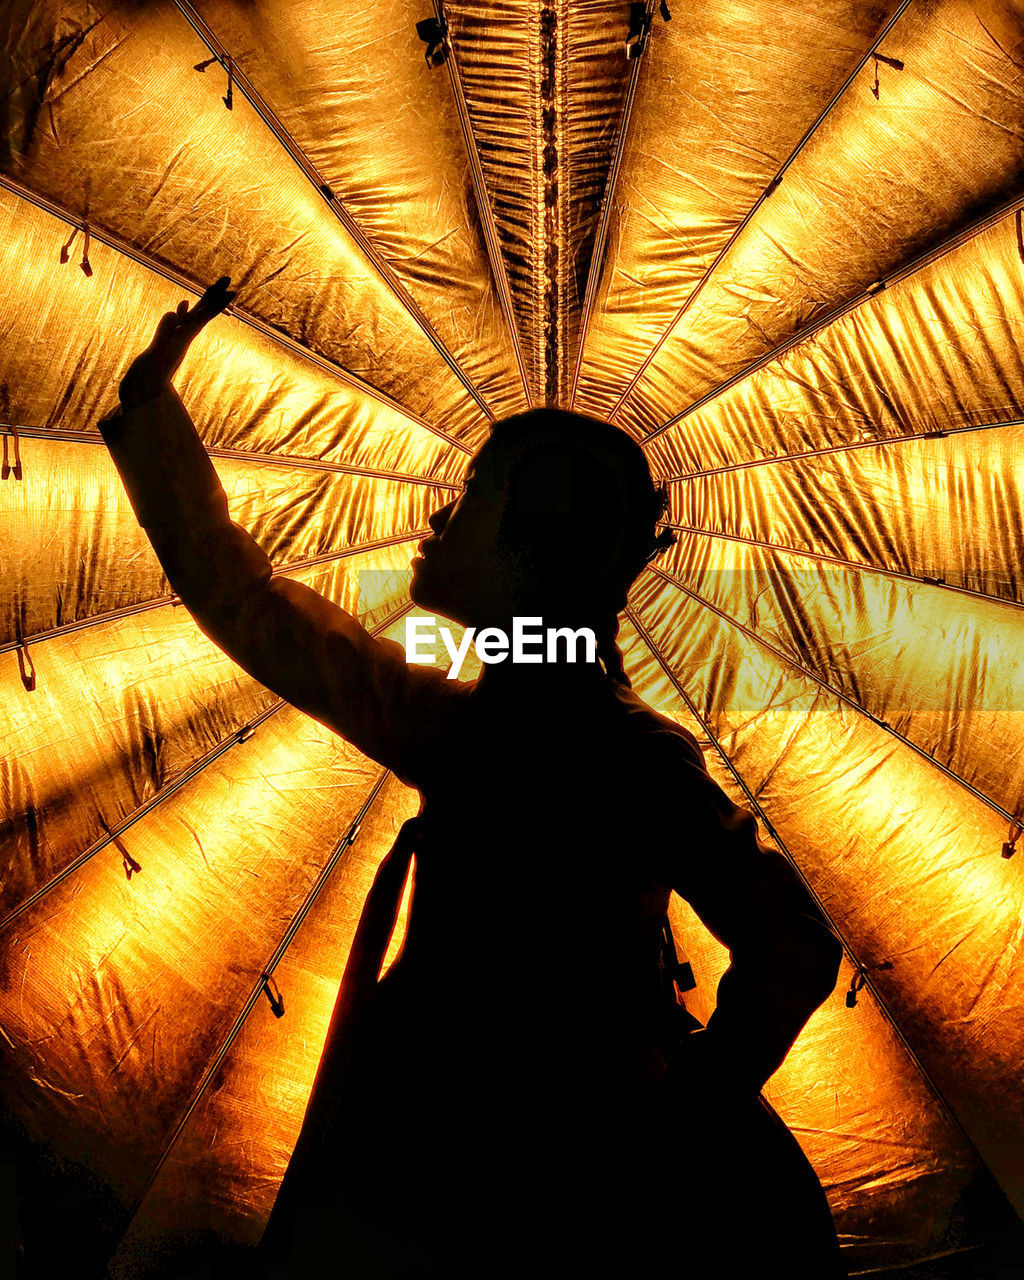 Silhouette woman with hand raised standing against illuminated orange curtain